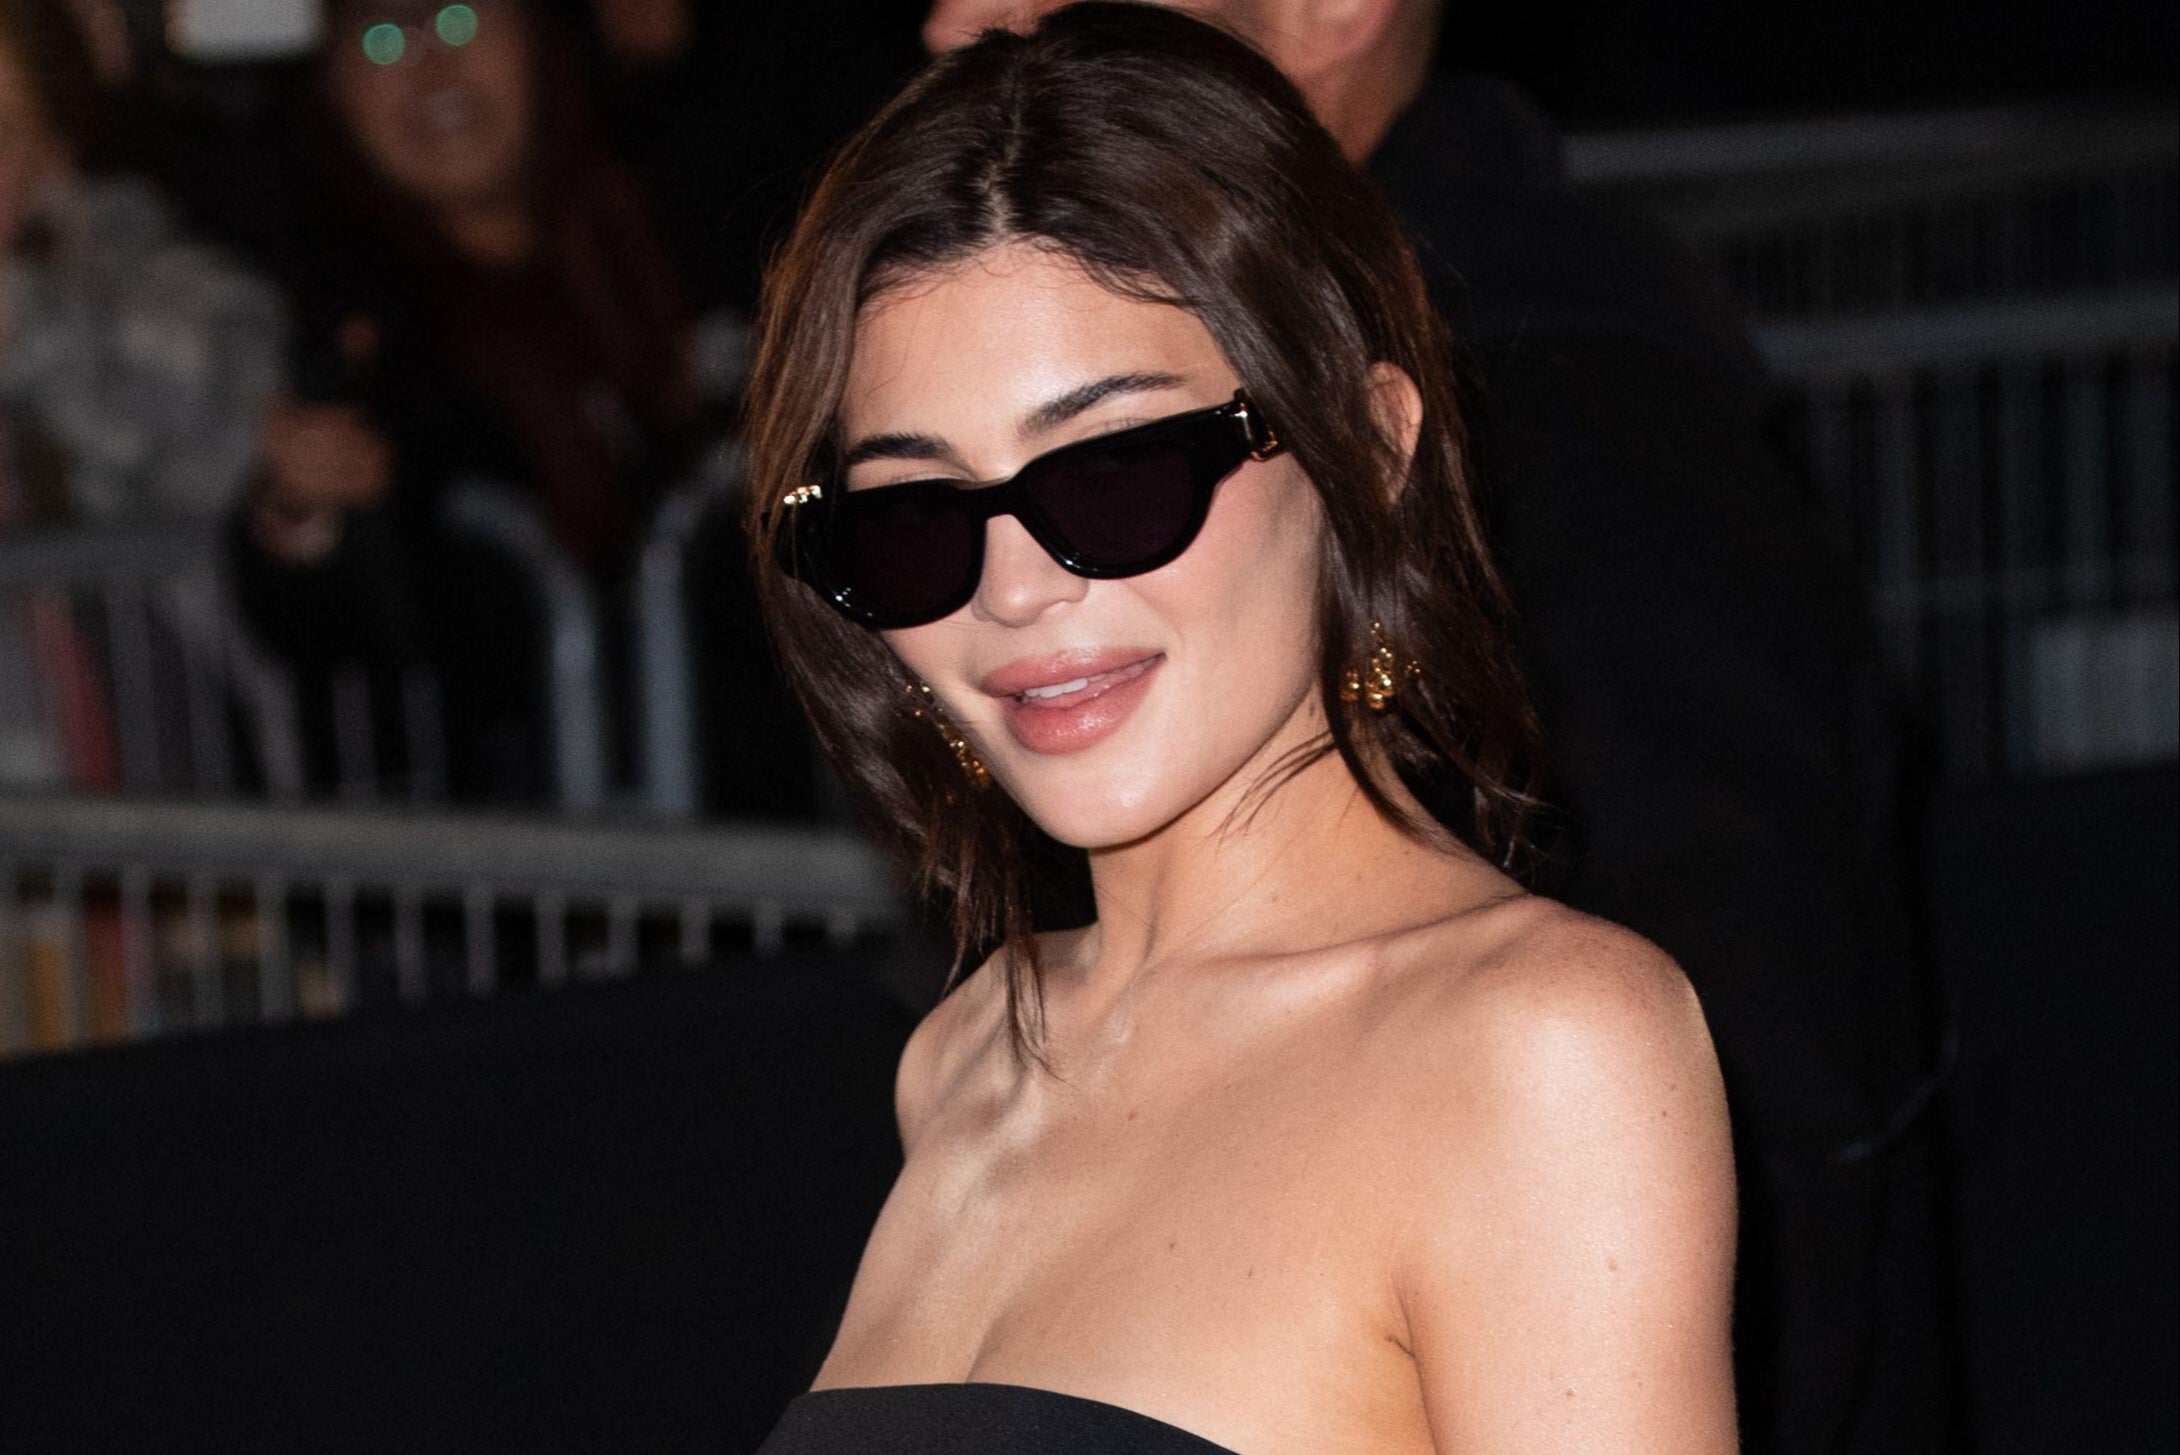 Kylie Jenner has been trolled over her appearance in pictures taken in January, when the starlet attended Paris Fashion Week